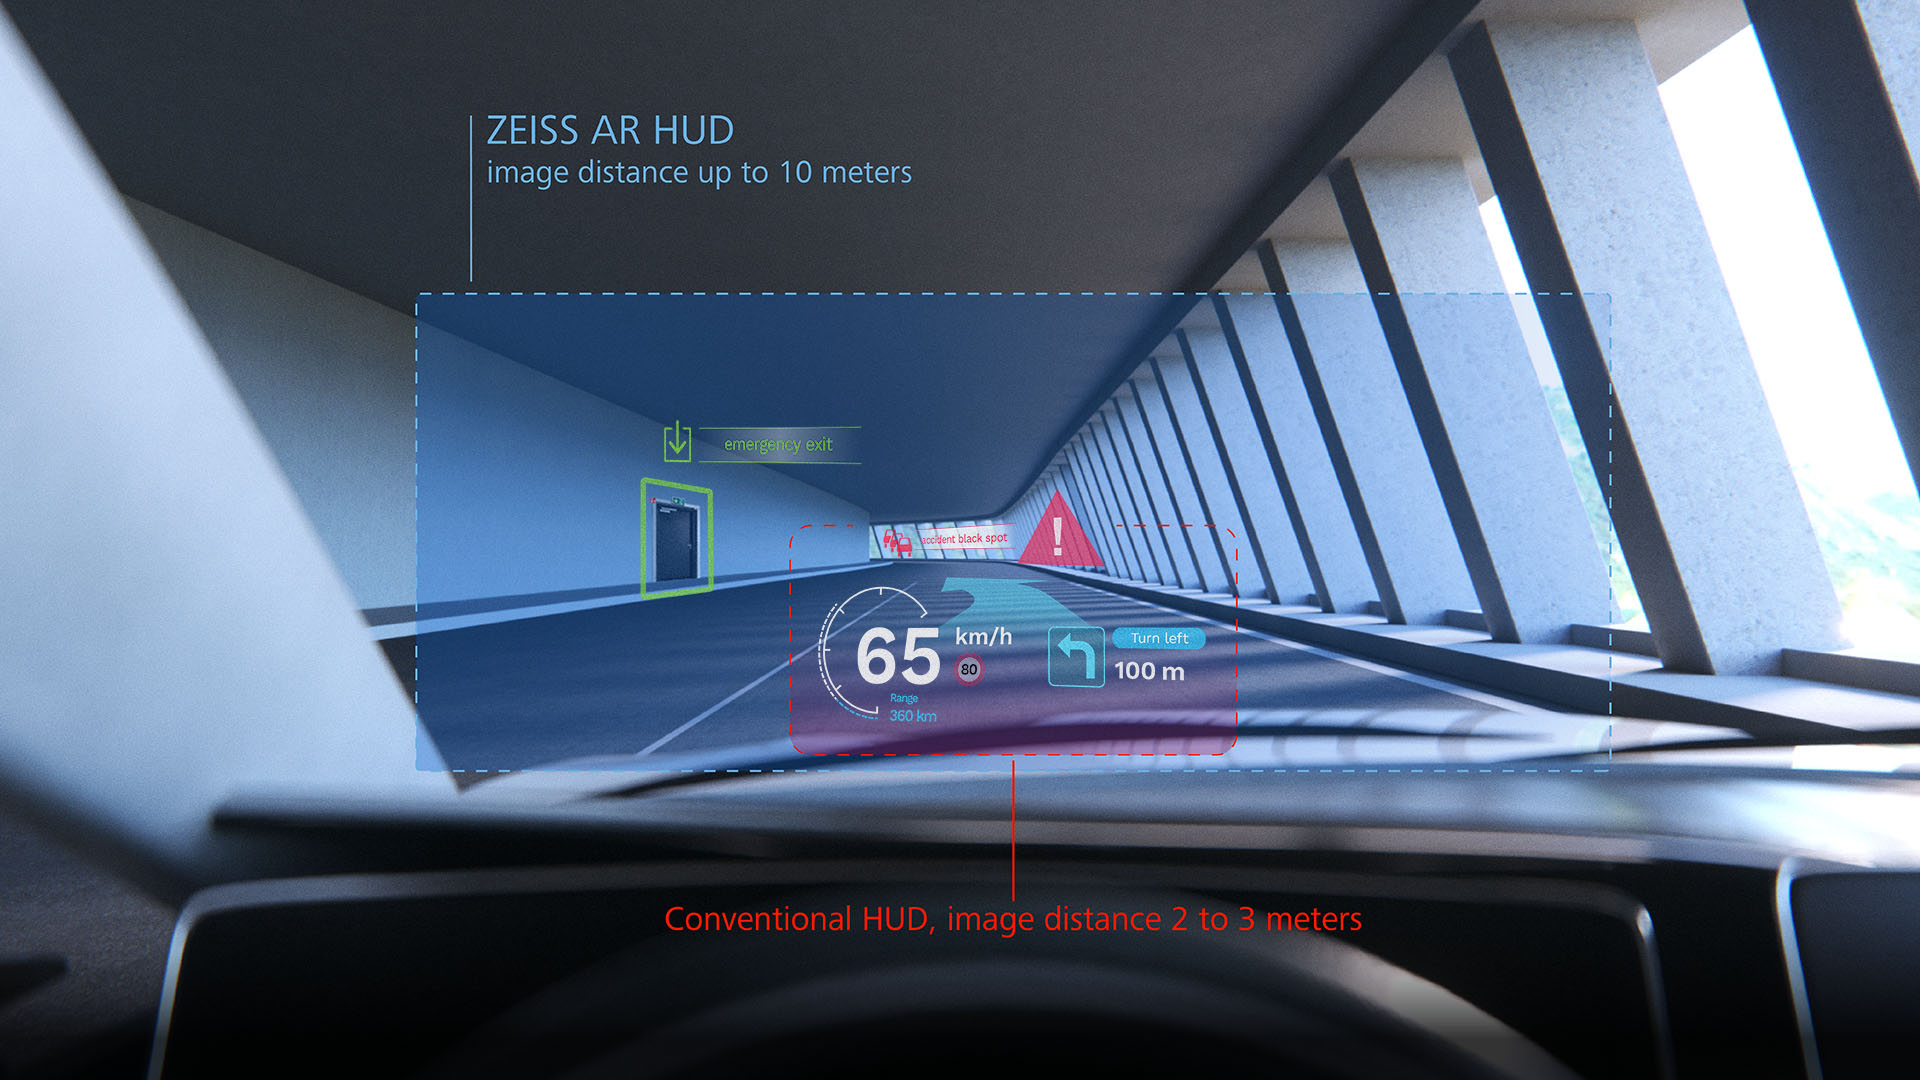 Ultra-compact, holographic augmented reality HUDs from ZEISS project a complete field of view as a virtual image onto the windshield.